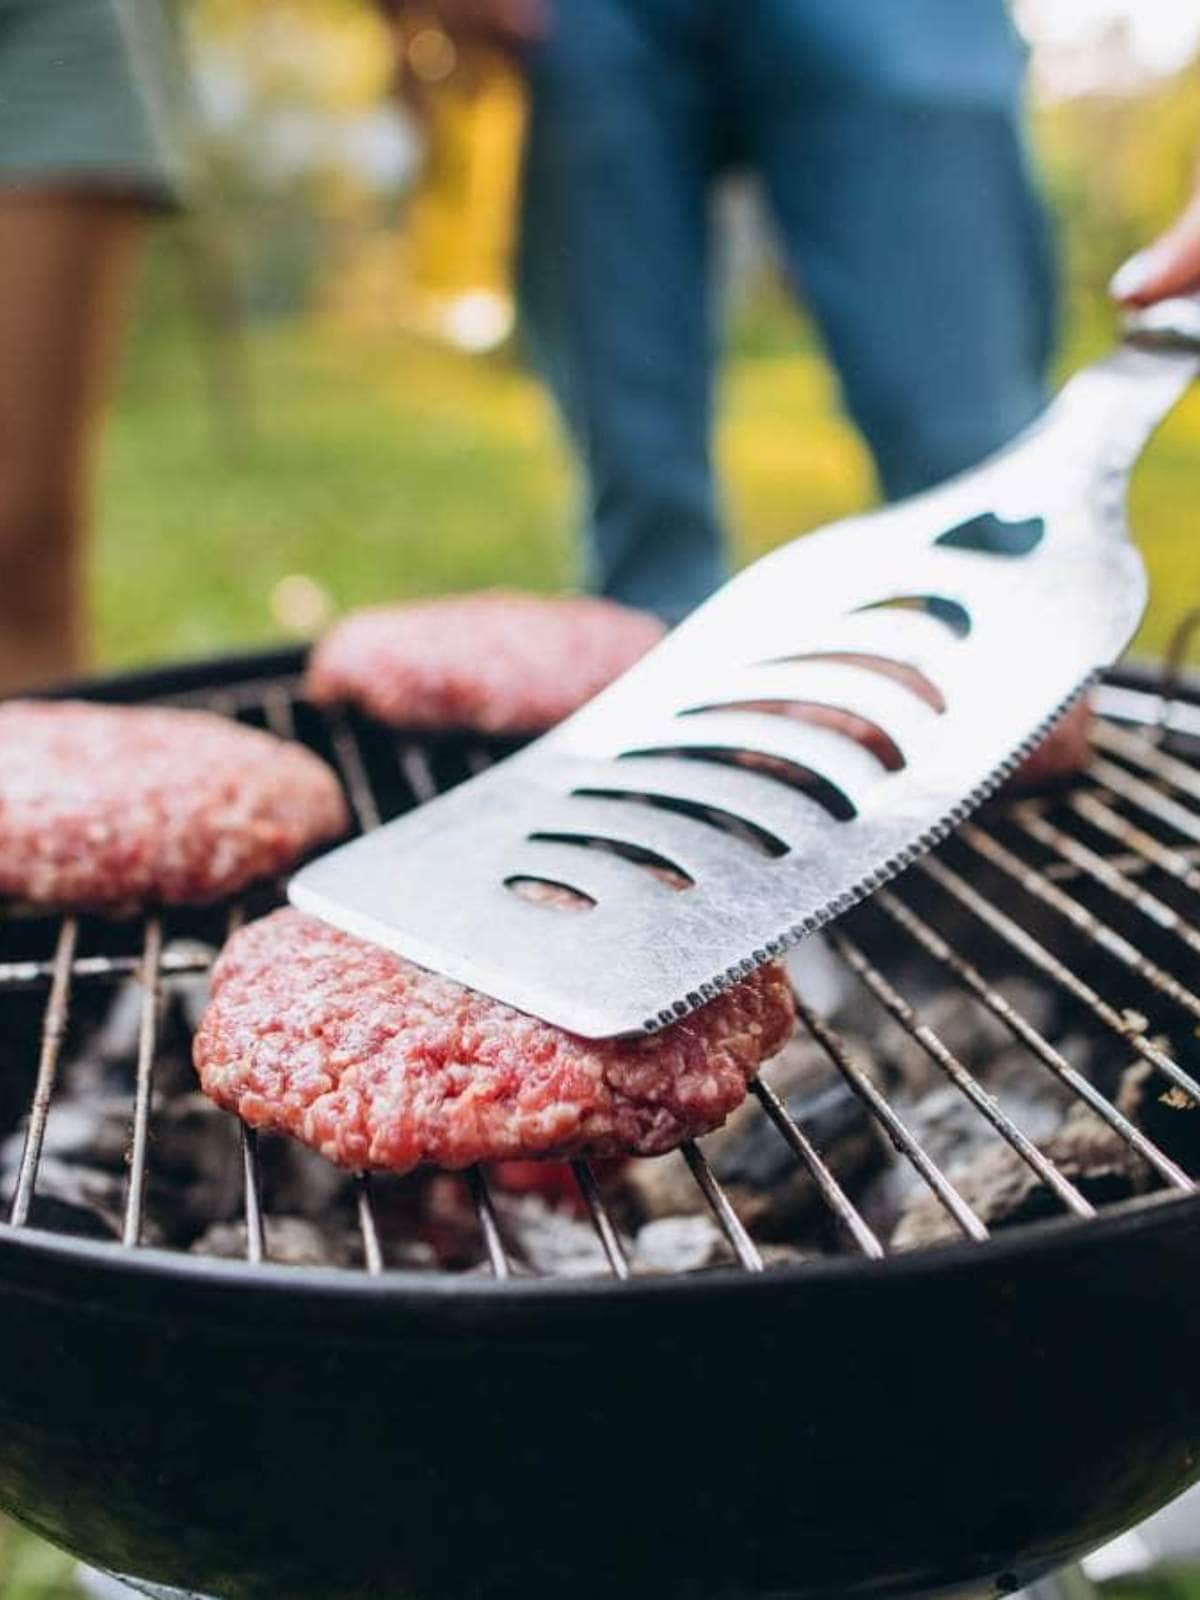 A metal spatula presses down on raw burger patties cooking on a round charcoal grill.